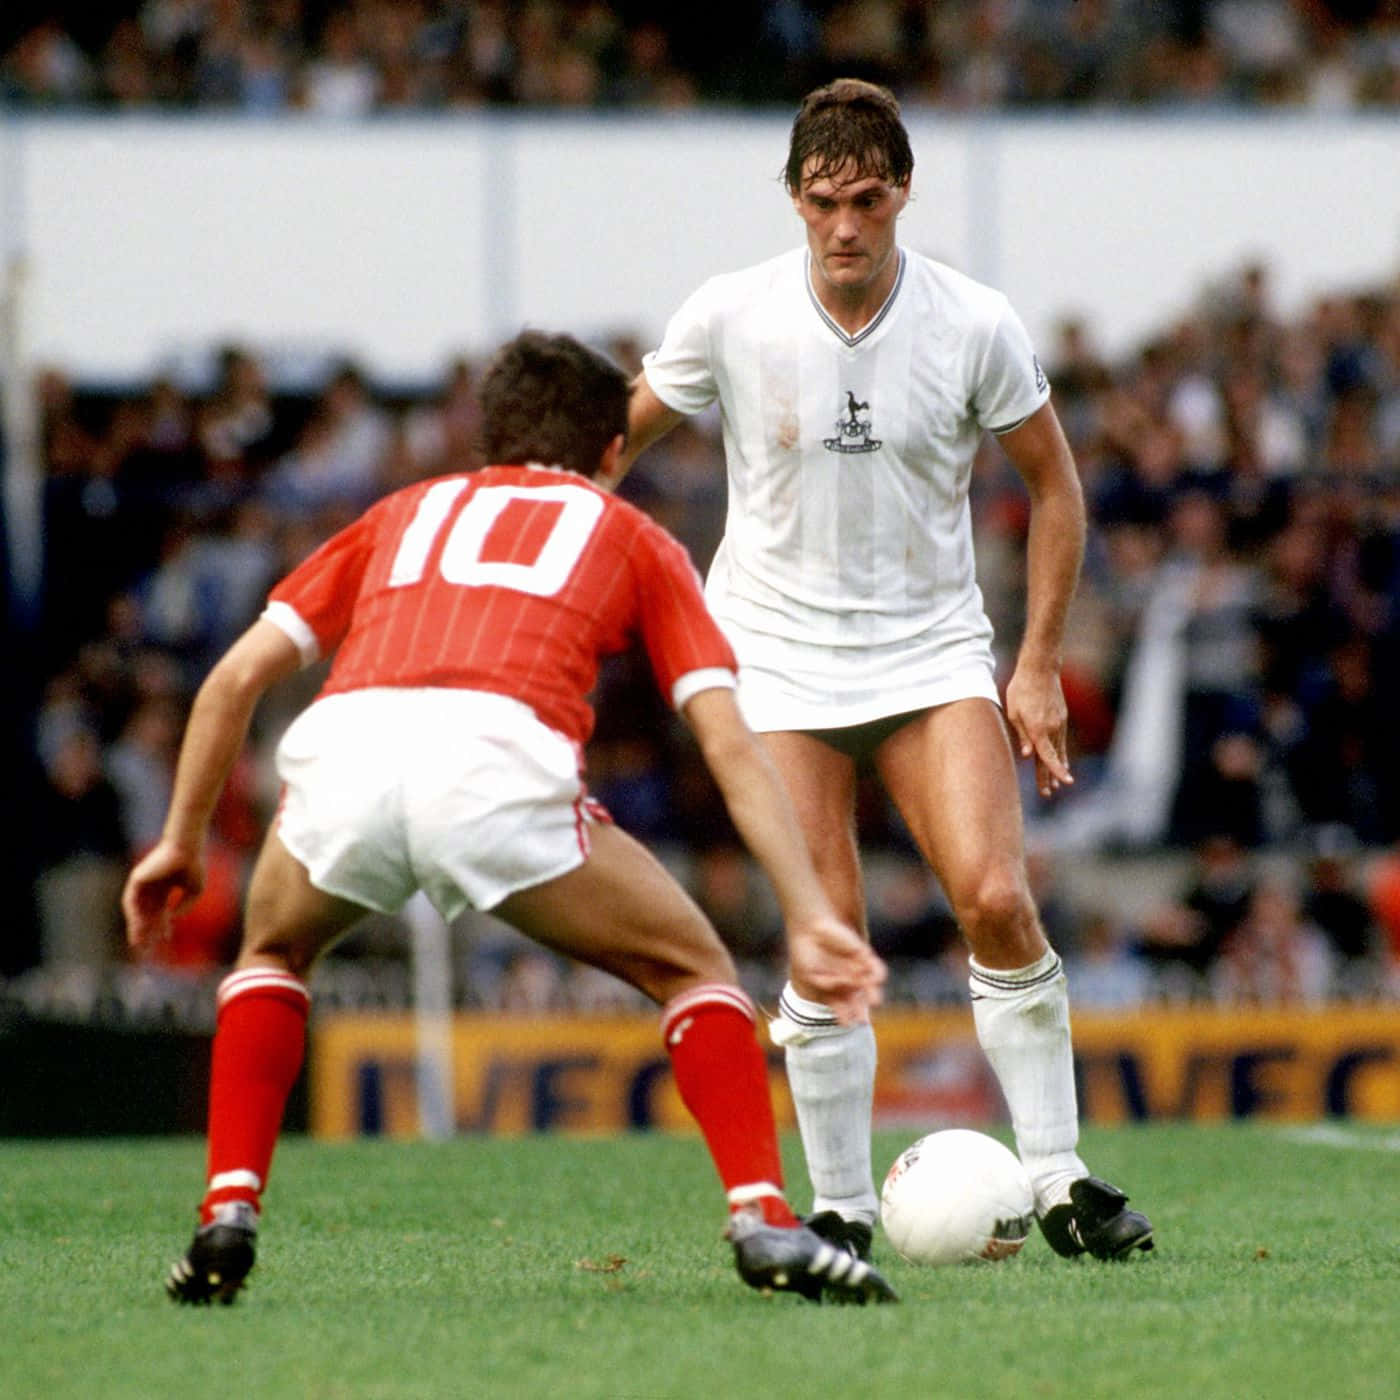 Glenn Hoddle Young Football Match Picture